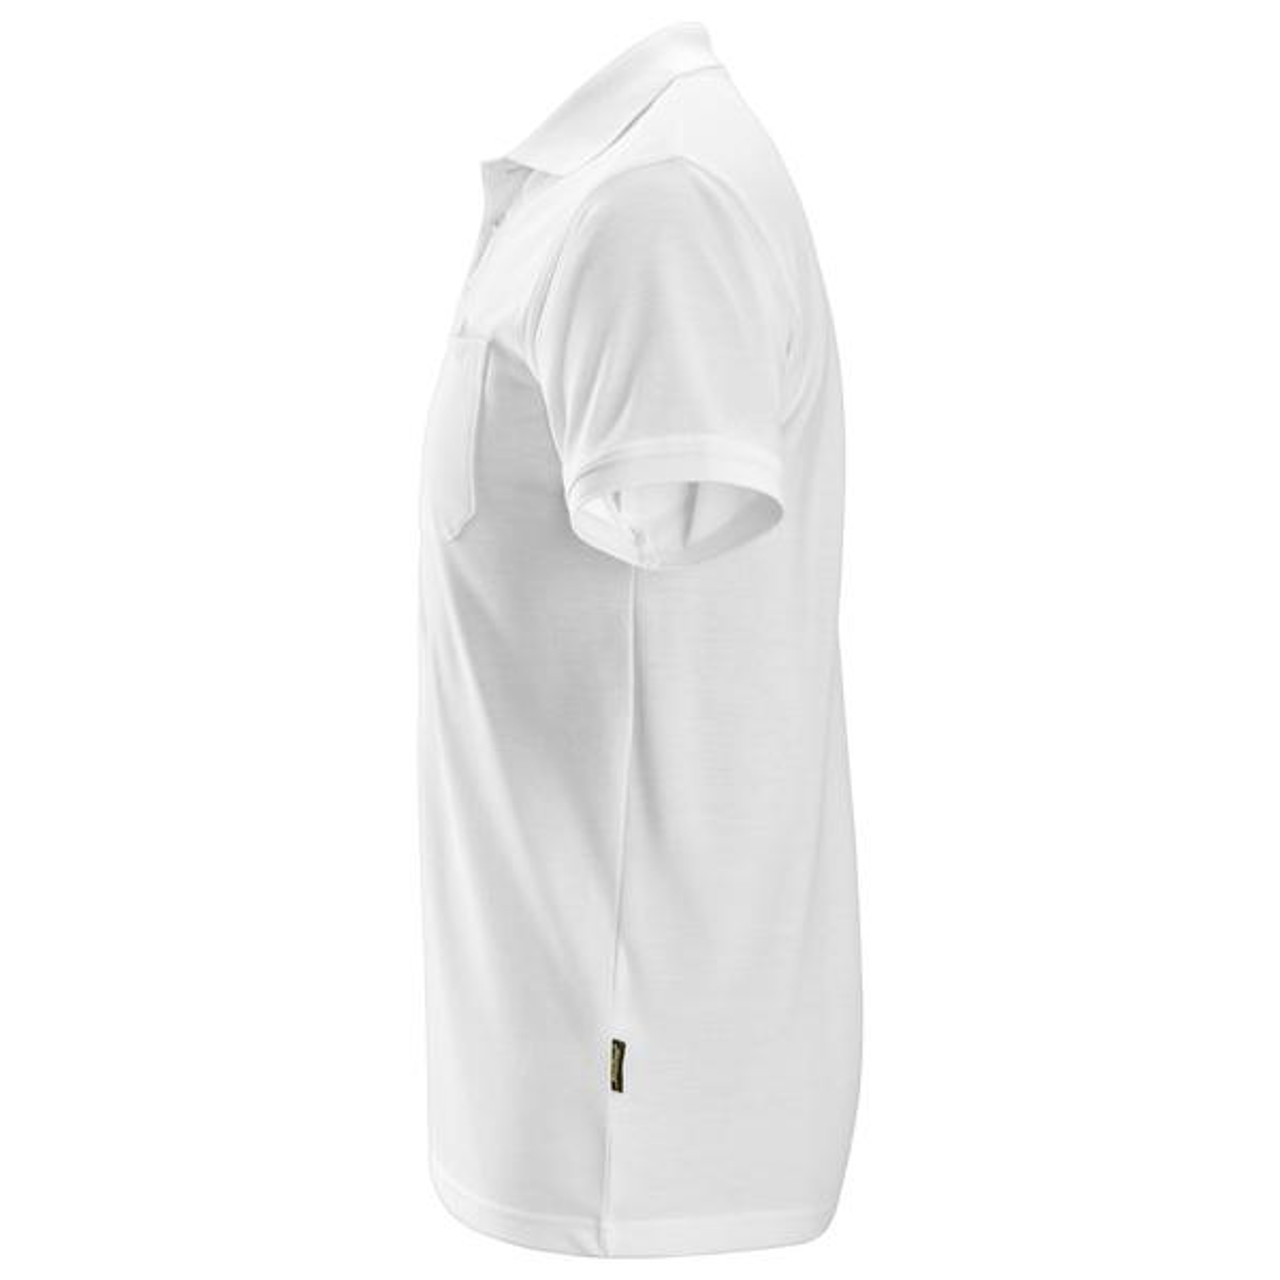 SNICKERS Sweater | 2708 White Classic for use as Polo Shirt for Work Shirts, Uniforms on Demand and Branded Workwear